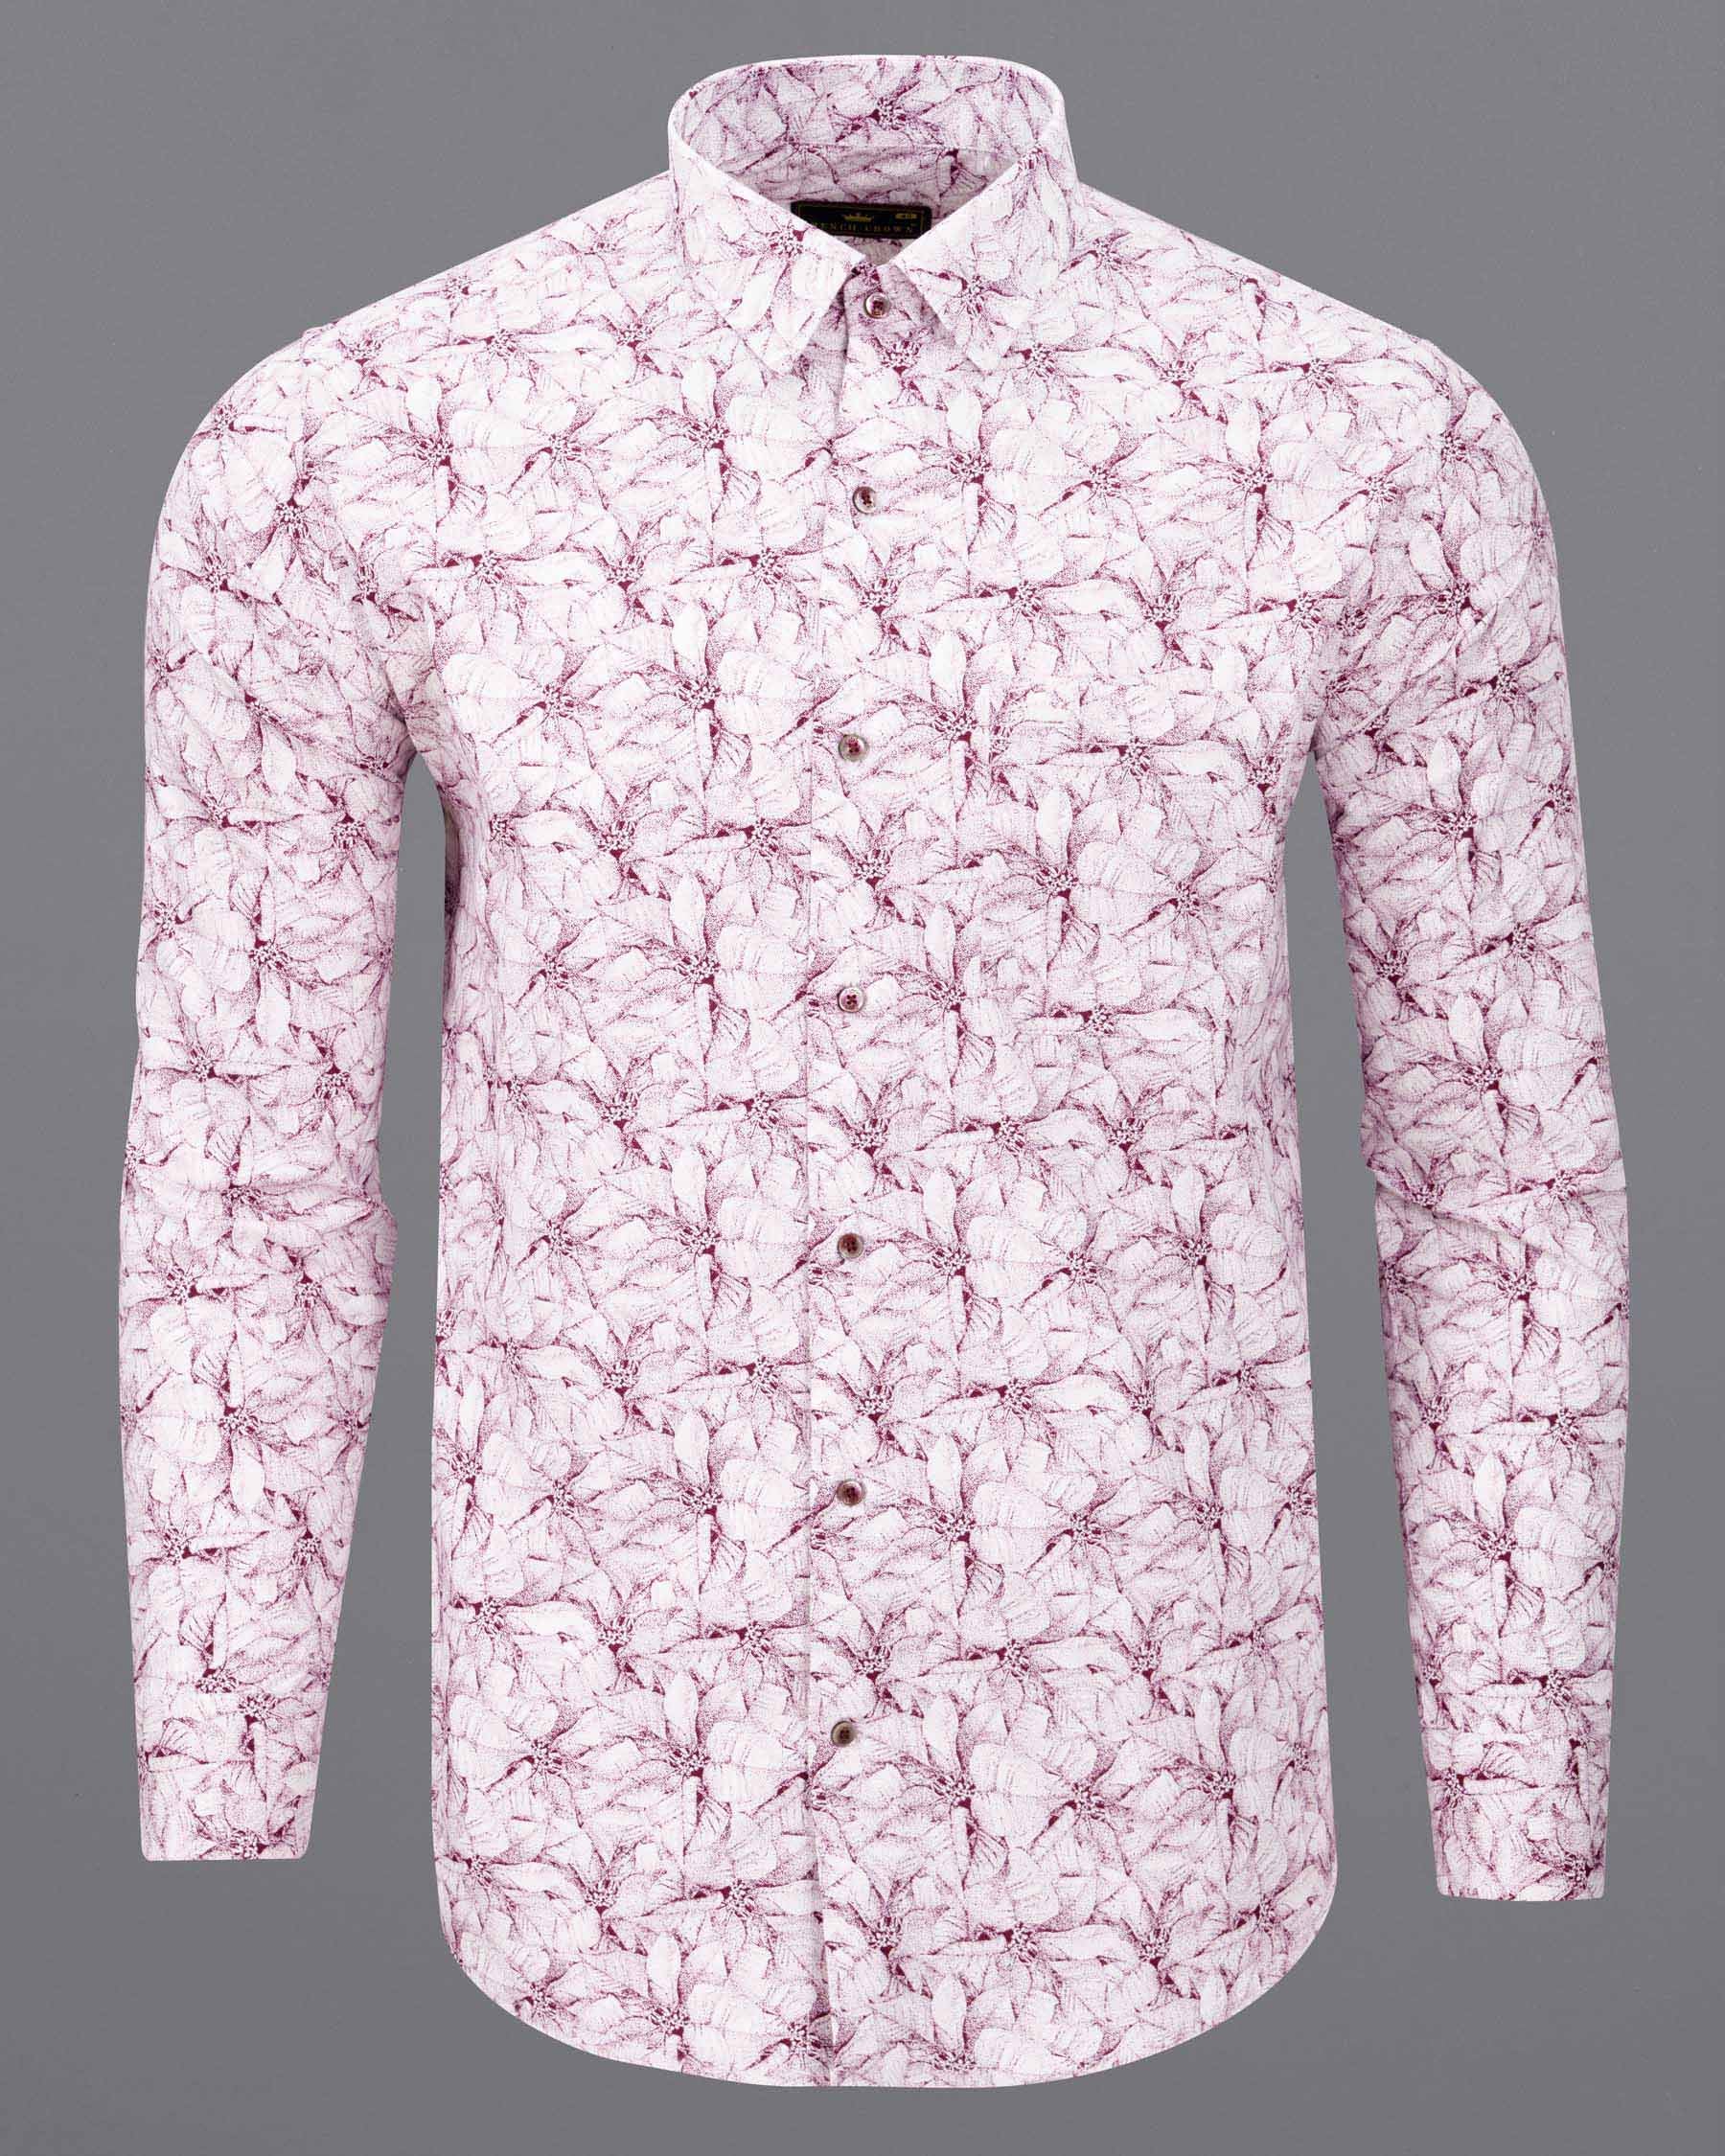 White with Disco Red leaves printed Royal Oxford Shirt 6149-MN-38, 6149-MN-H-38, 6149-MN-39, 6149-MN-H-39, 6149-MN-40, 6149-MN-H-40, 6149-MN-42, 6149-MN-H-42, 6149-MN-44, 6149-MN-H-44, 6149-MN-46, 6149-MN-H-46, 6149-MN-48, 6149-MN-H-48, 6149-MN-50, 6149-MN-H-50, 6149-MN-52, 6149-MN-H-52